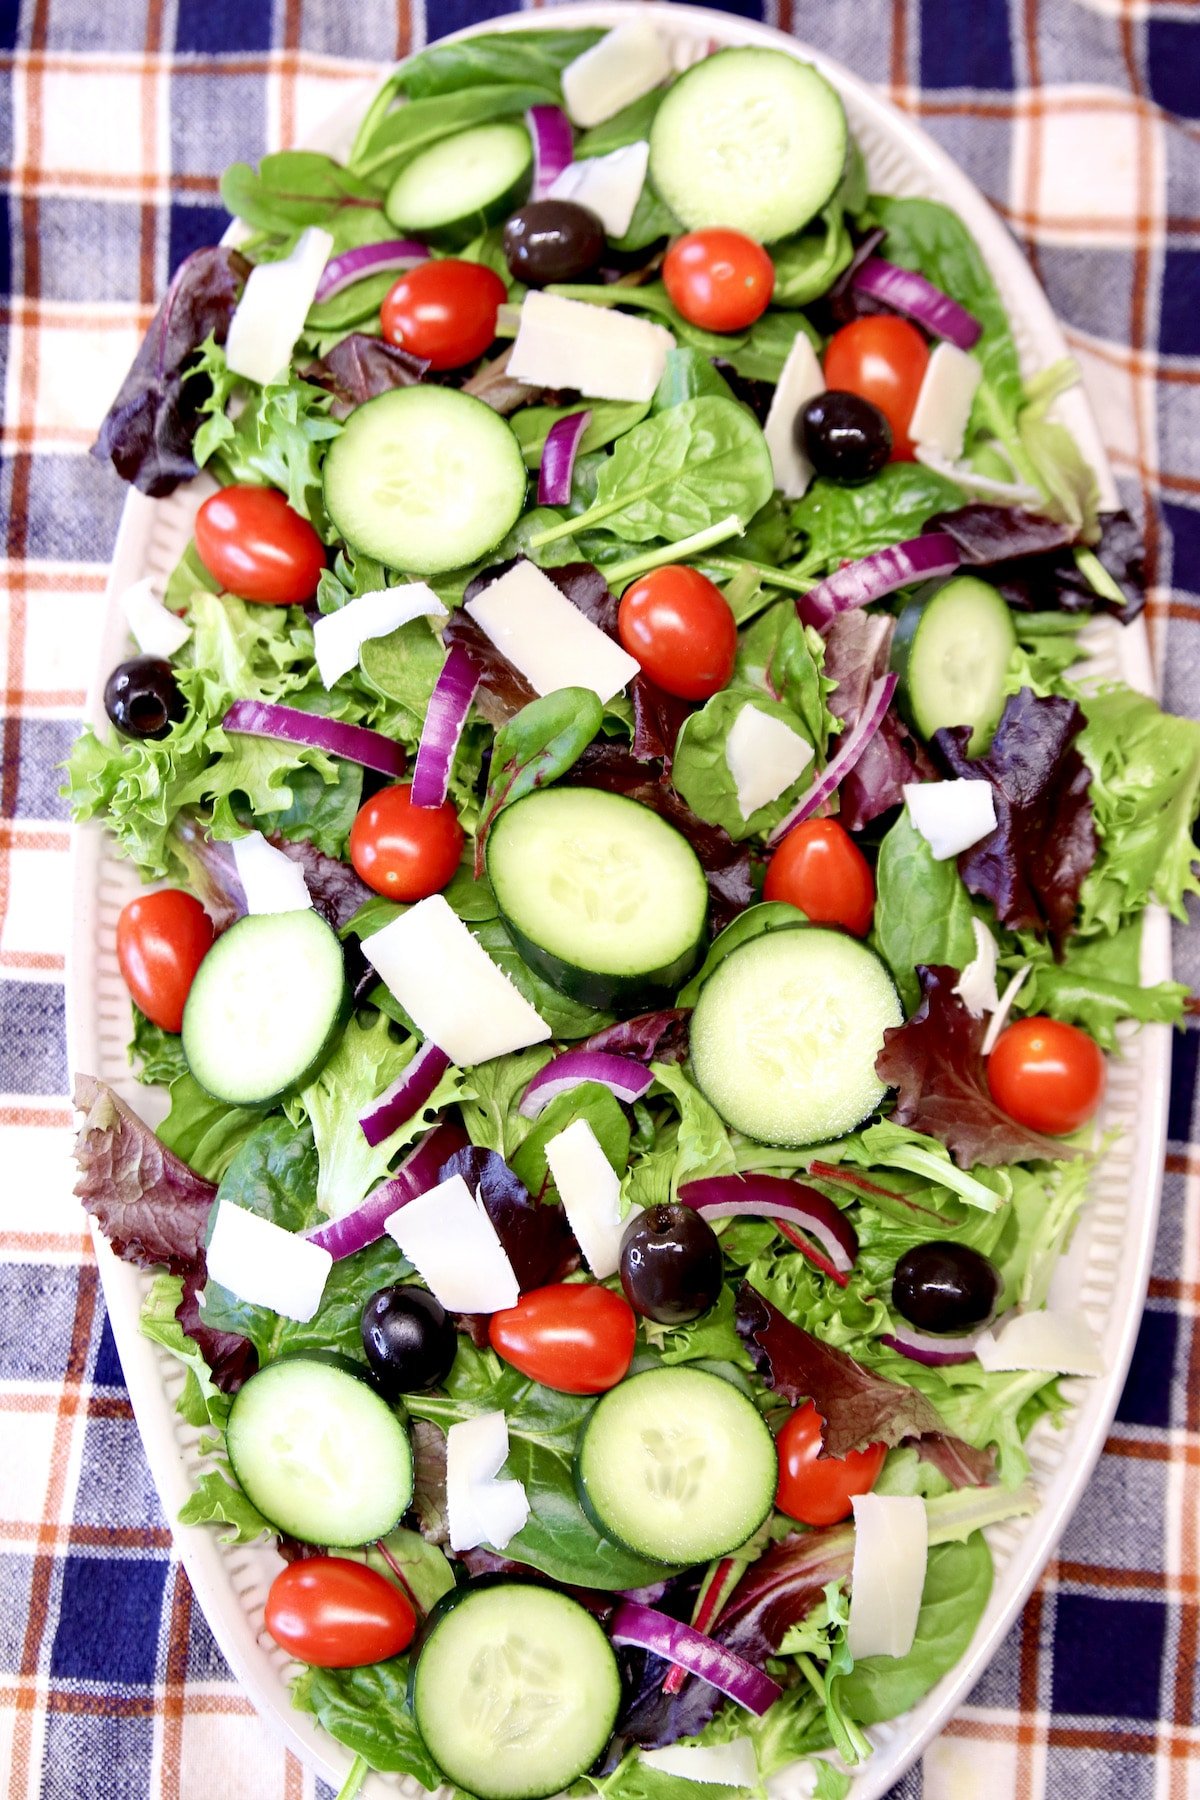 Platter with salad greens, tomatoes, olives, parmesan cheese.d